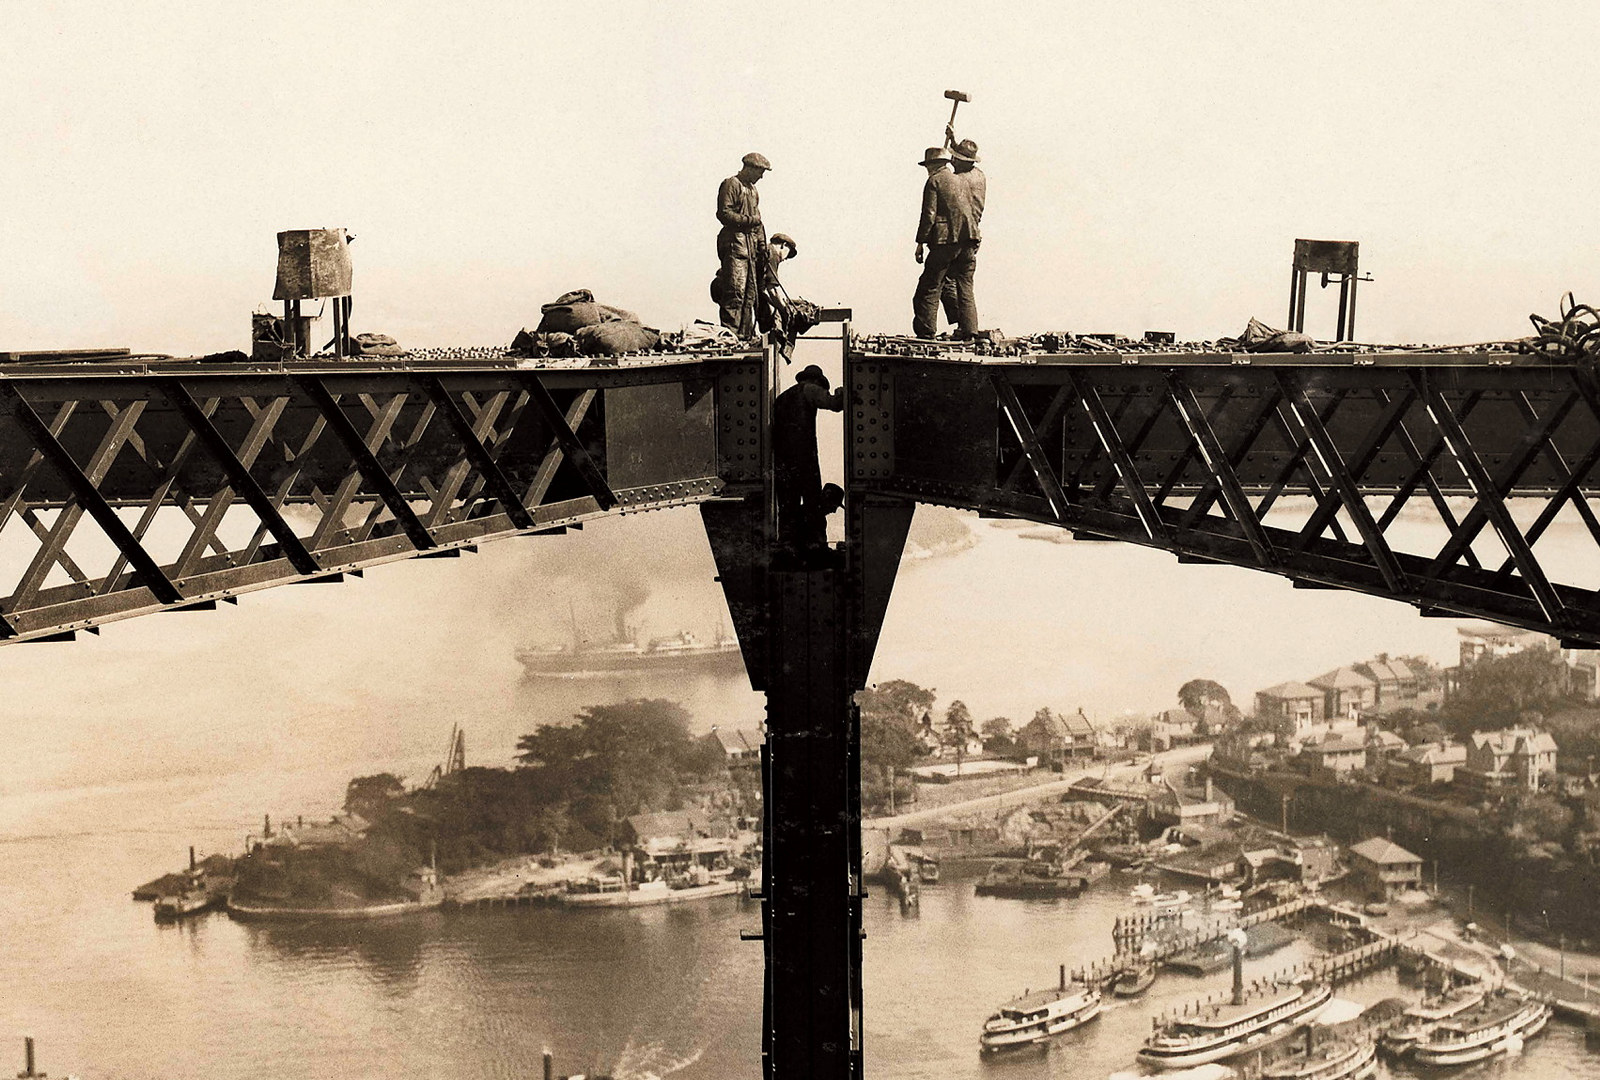 Image of a partly constructed bridge with workers standing on steel girders high above the harbour.